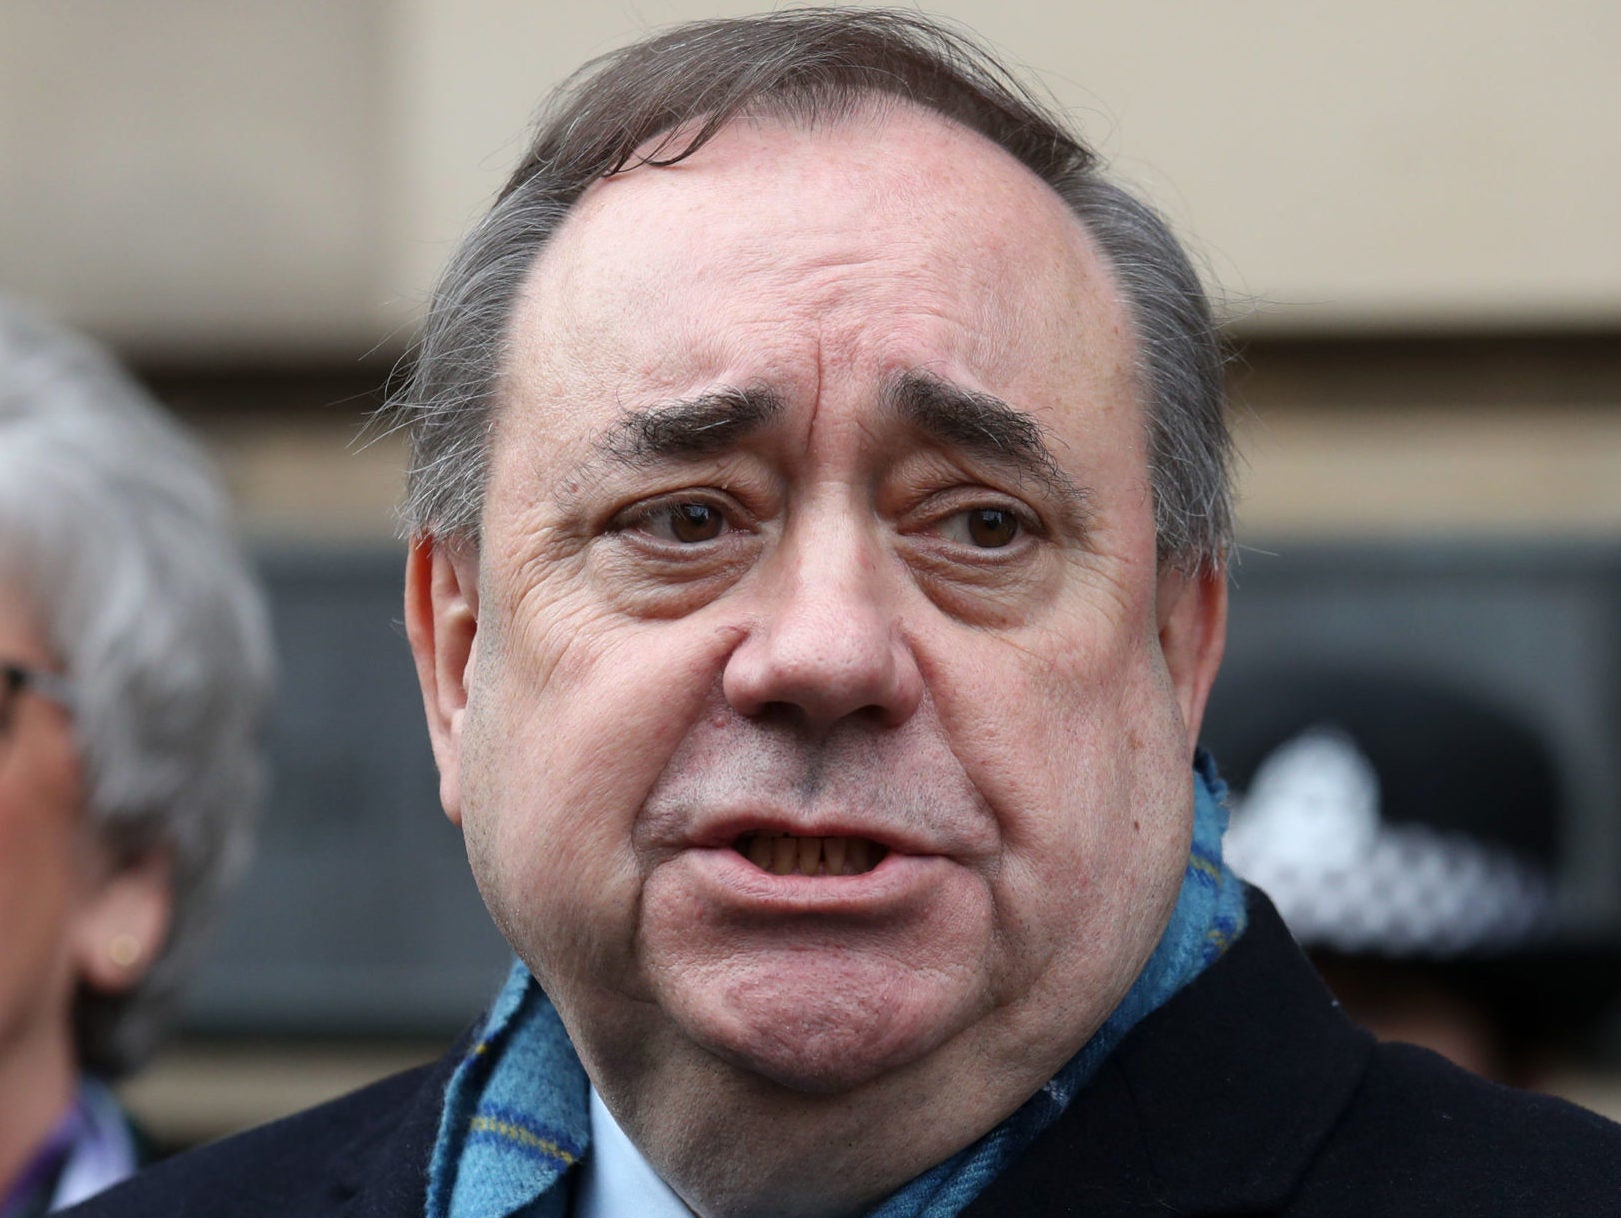 Blogger took care not to identify women in Alex Salmond trial, court told